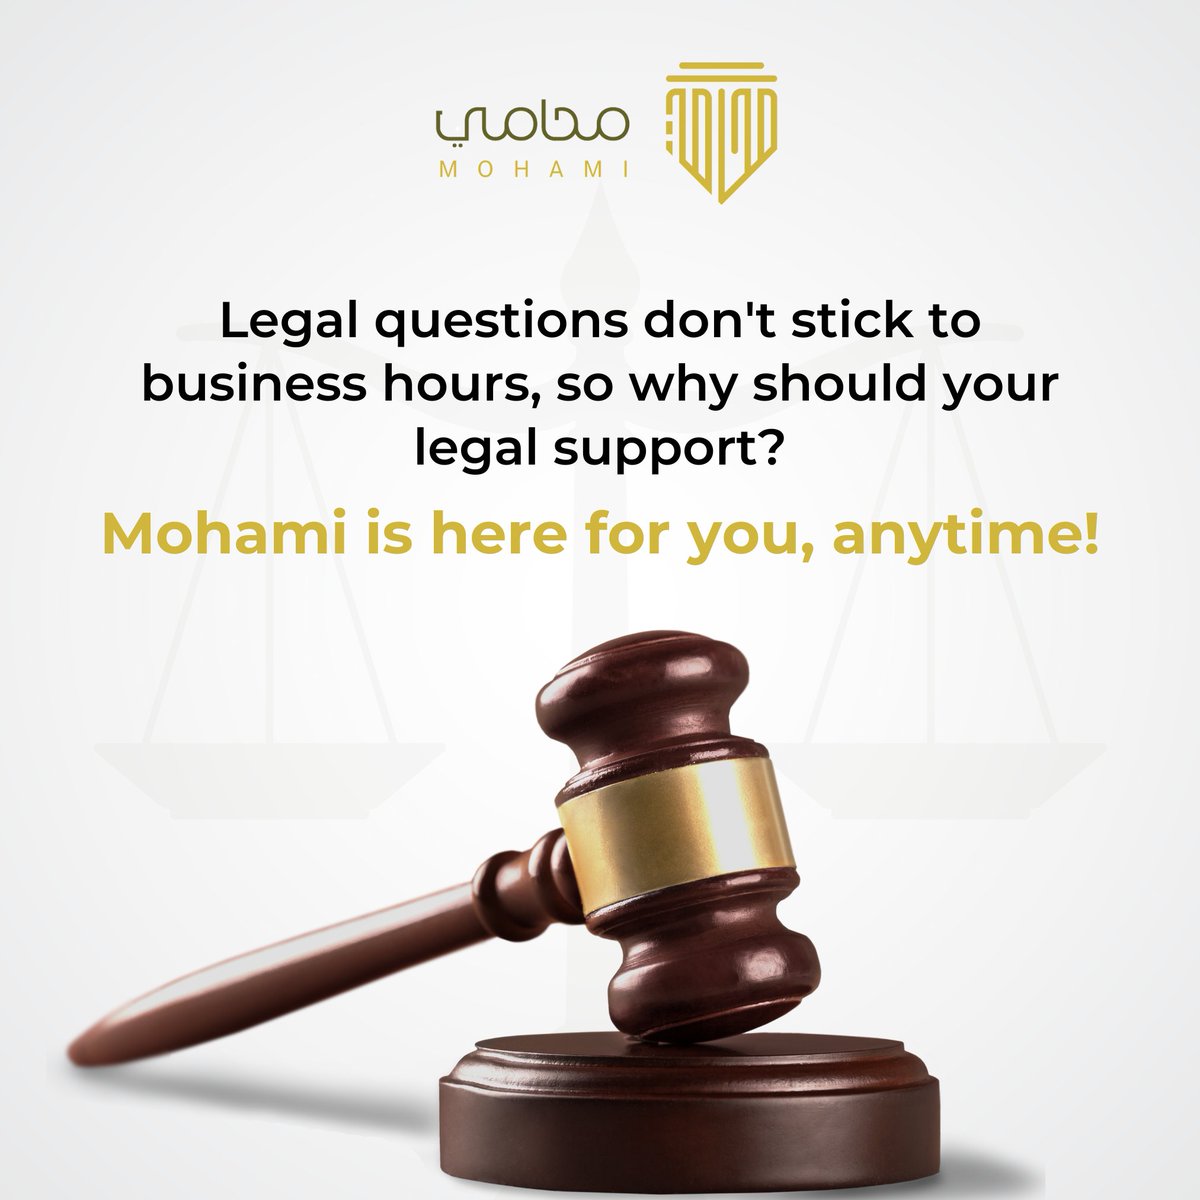 Need legal help at any time of the day? Mohami is just a tap away whenever you need us—because legal questions don't follow a 9 to 5 schedule.

#LegalTech #DigitalLaw #LegalServices #OnlineLaw #TechLaw #LegalHelp #LegalAdviceOnline #LawAndTechnology #LegalIndustry #Mohami